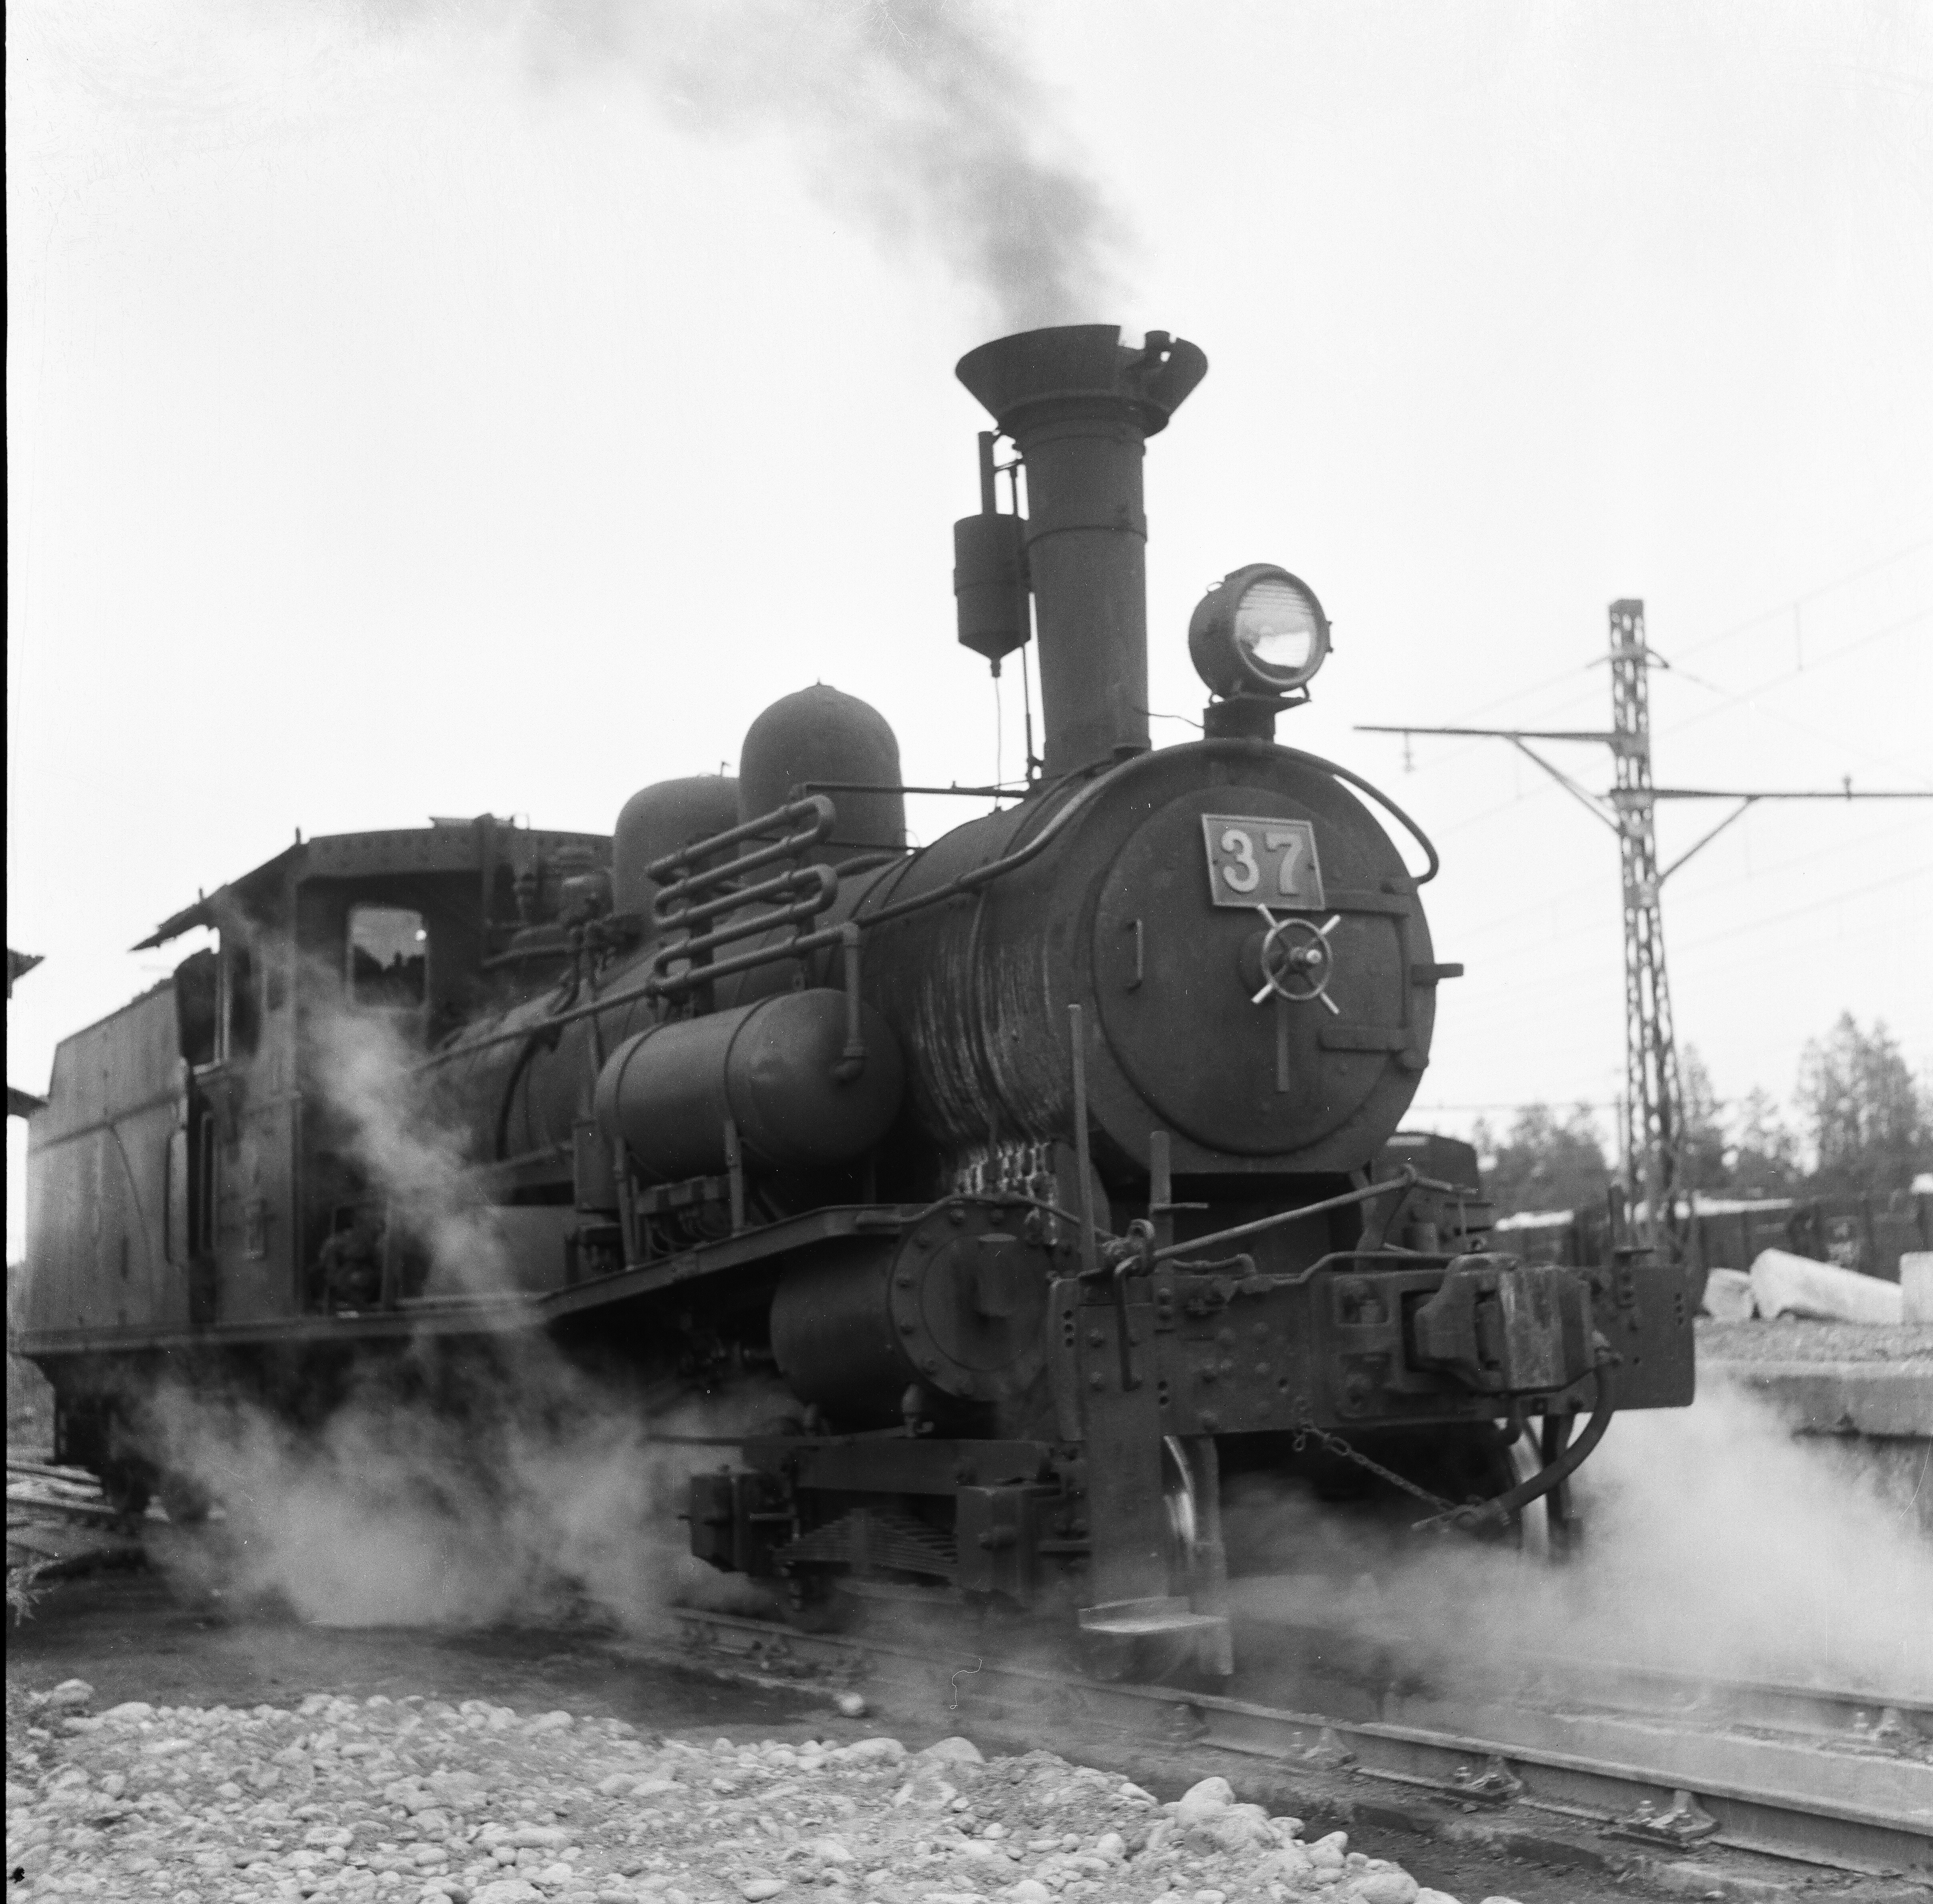 Tobu Railway number 37 steam locomotive was made in England and imported by Nippon Railway. It was used on Tohoku Line amongst other lines and transferred to Tobu Railway in 1922. It pulled freight cars on Oya Line until 1962.